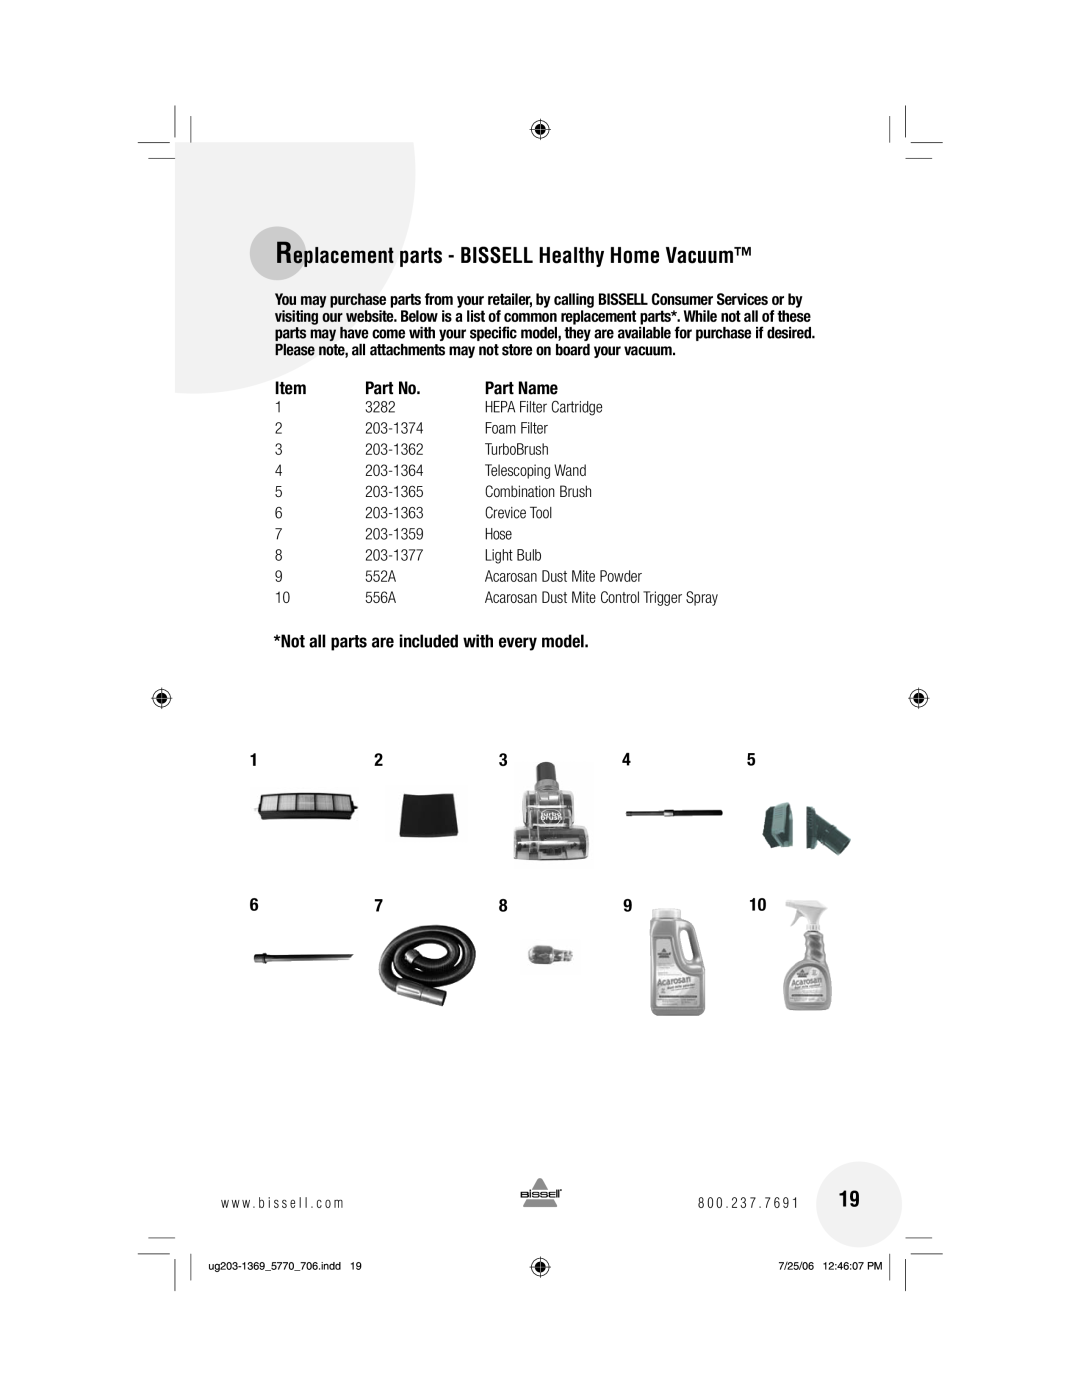 Bissell 5770, 5990 Replacement parts - BISSELL Healthy Home Vacuum, Part Name, Not all parts are included with every model 